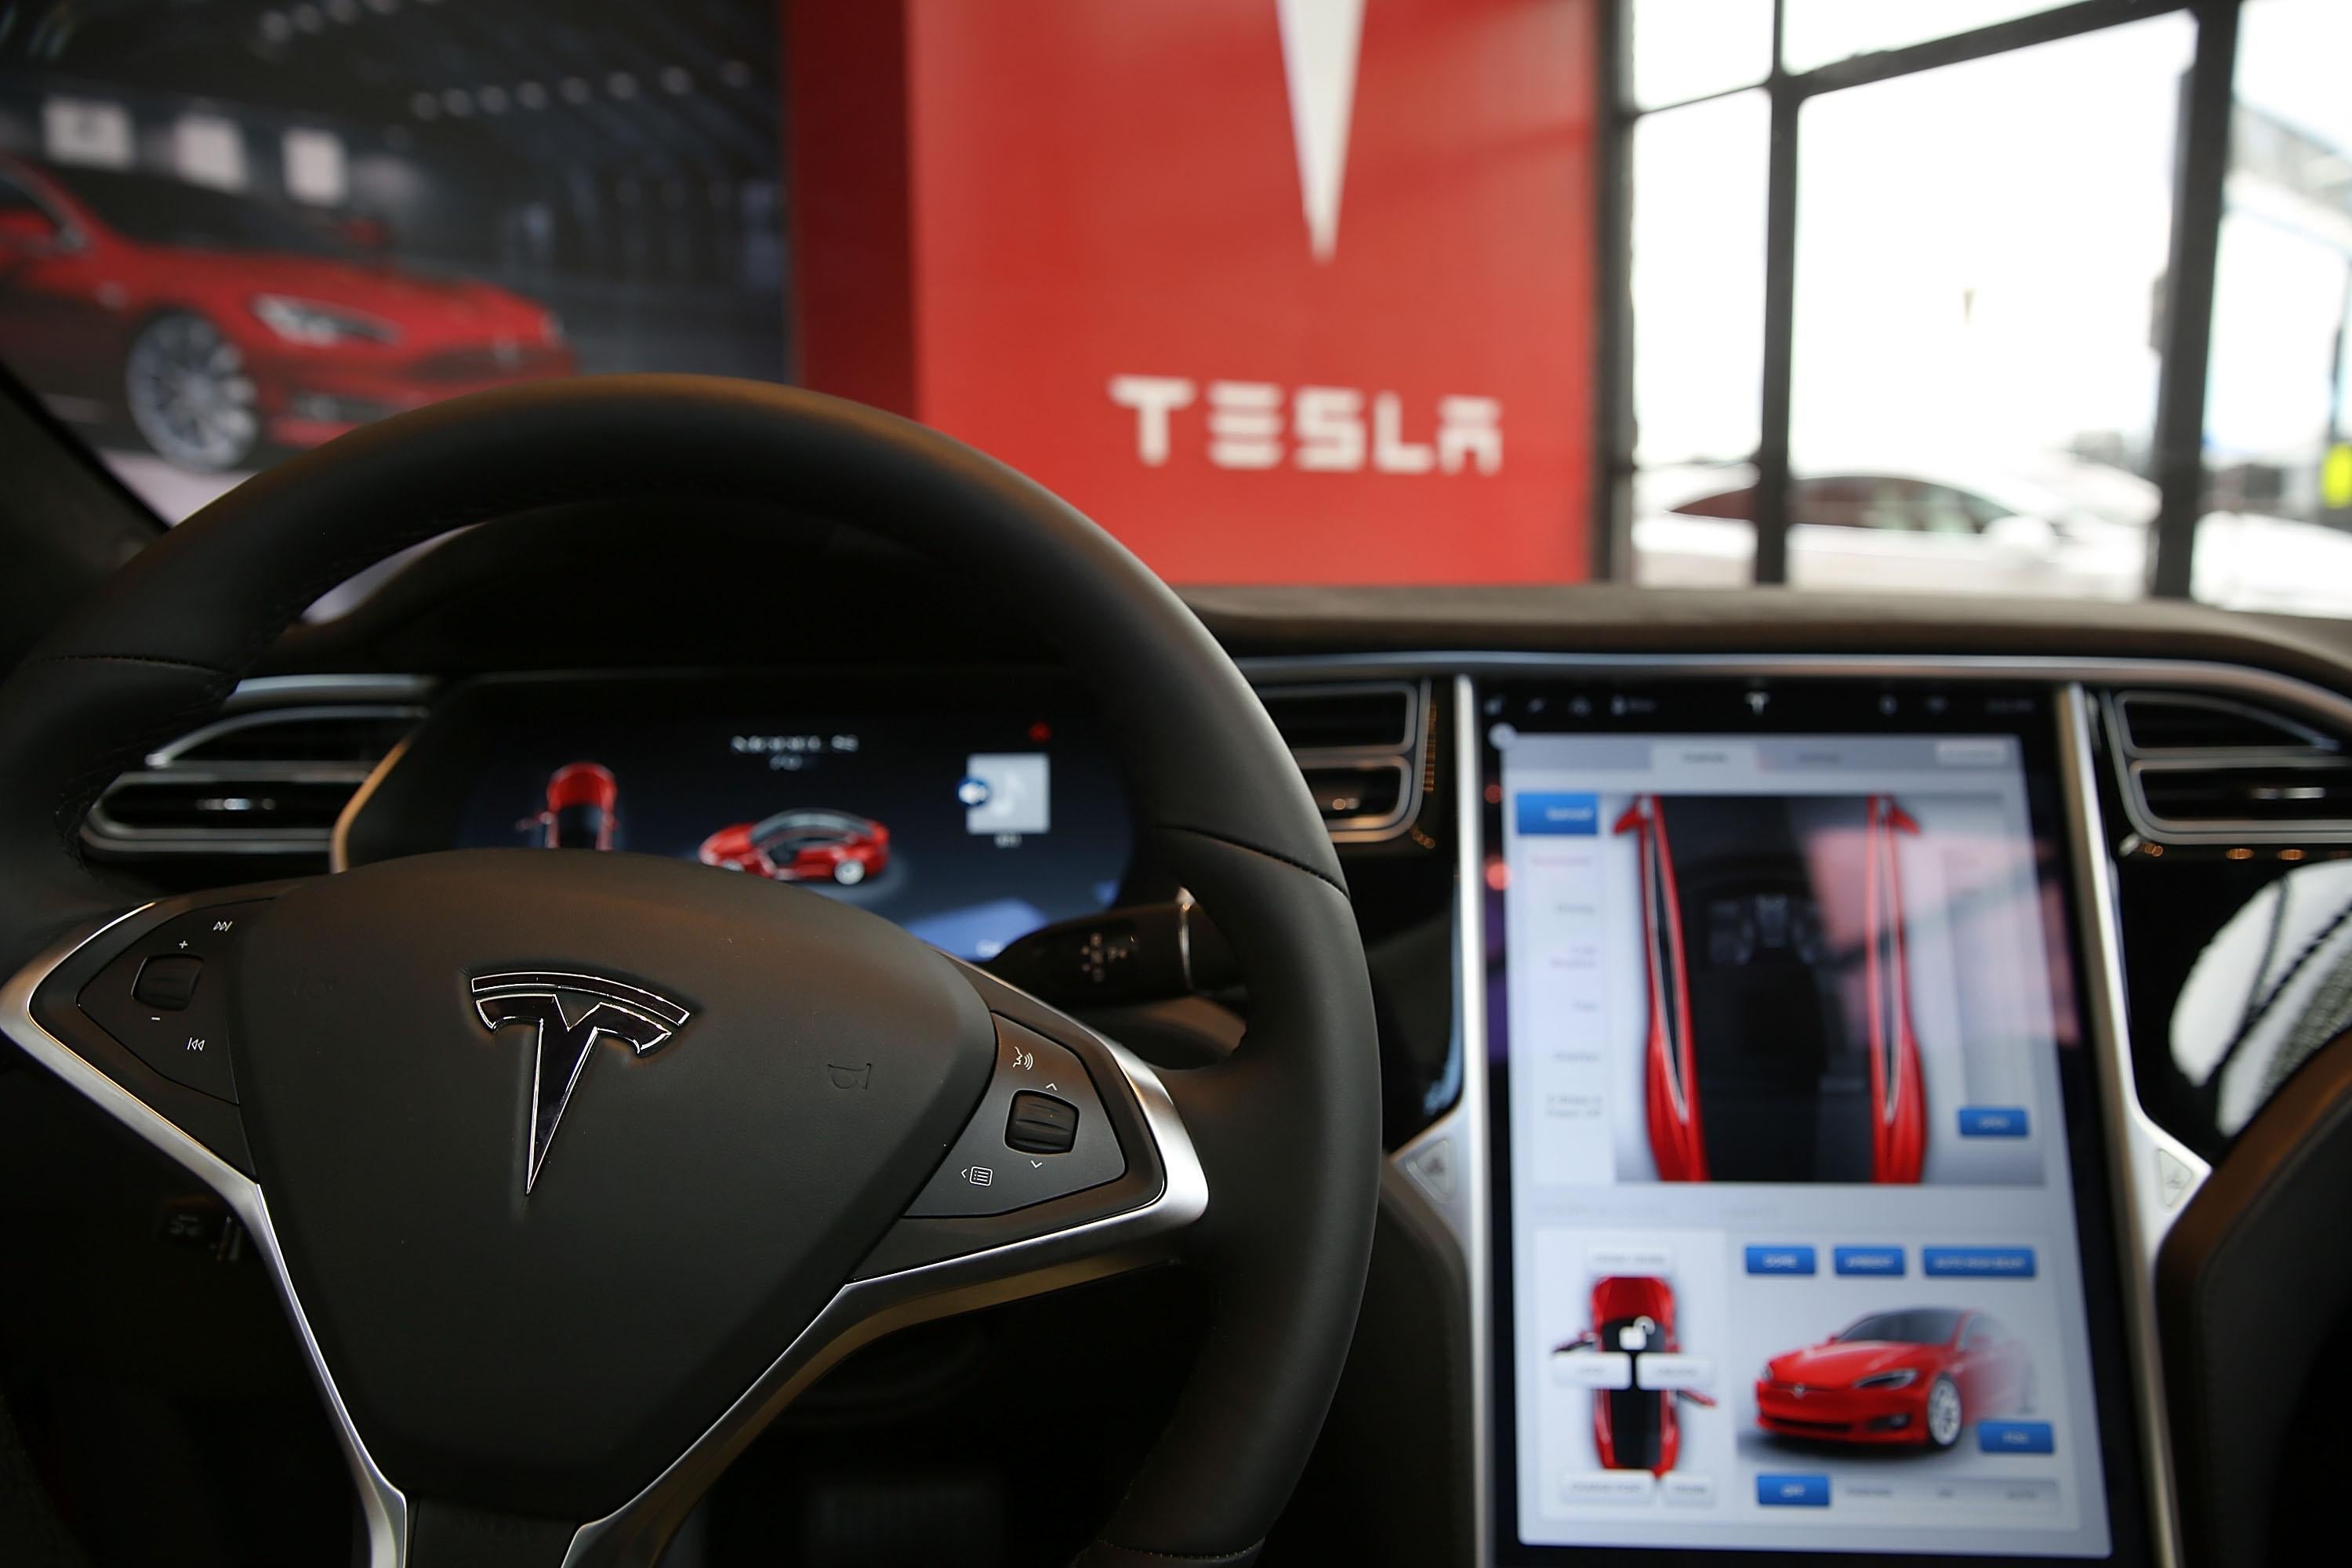 The inside of a Tesla vehicle as it sits parked in a new Tesla showroom.